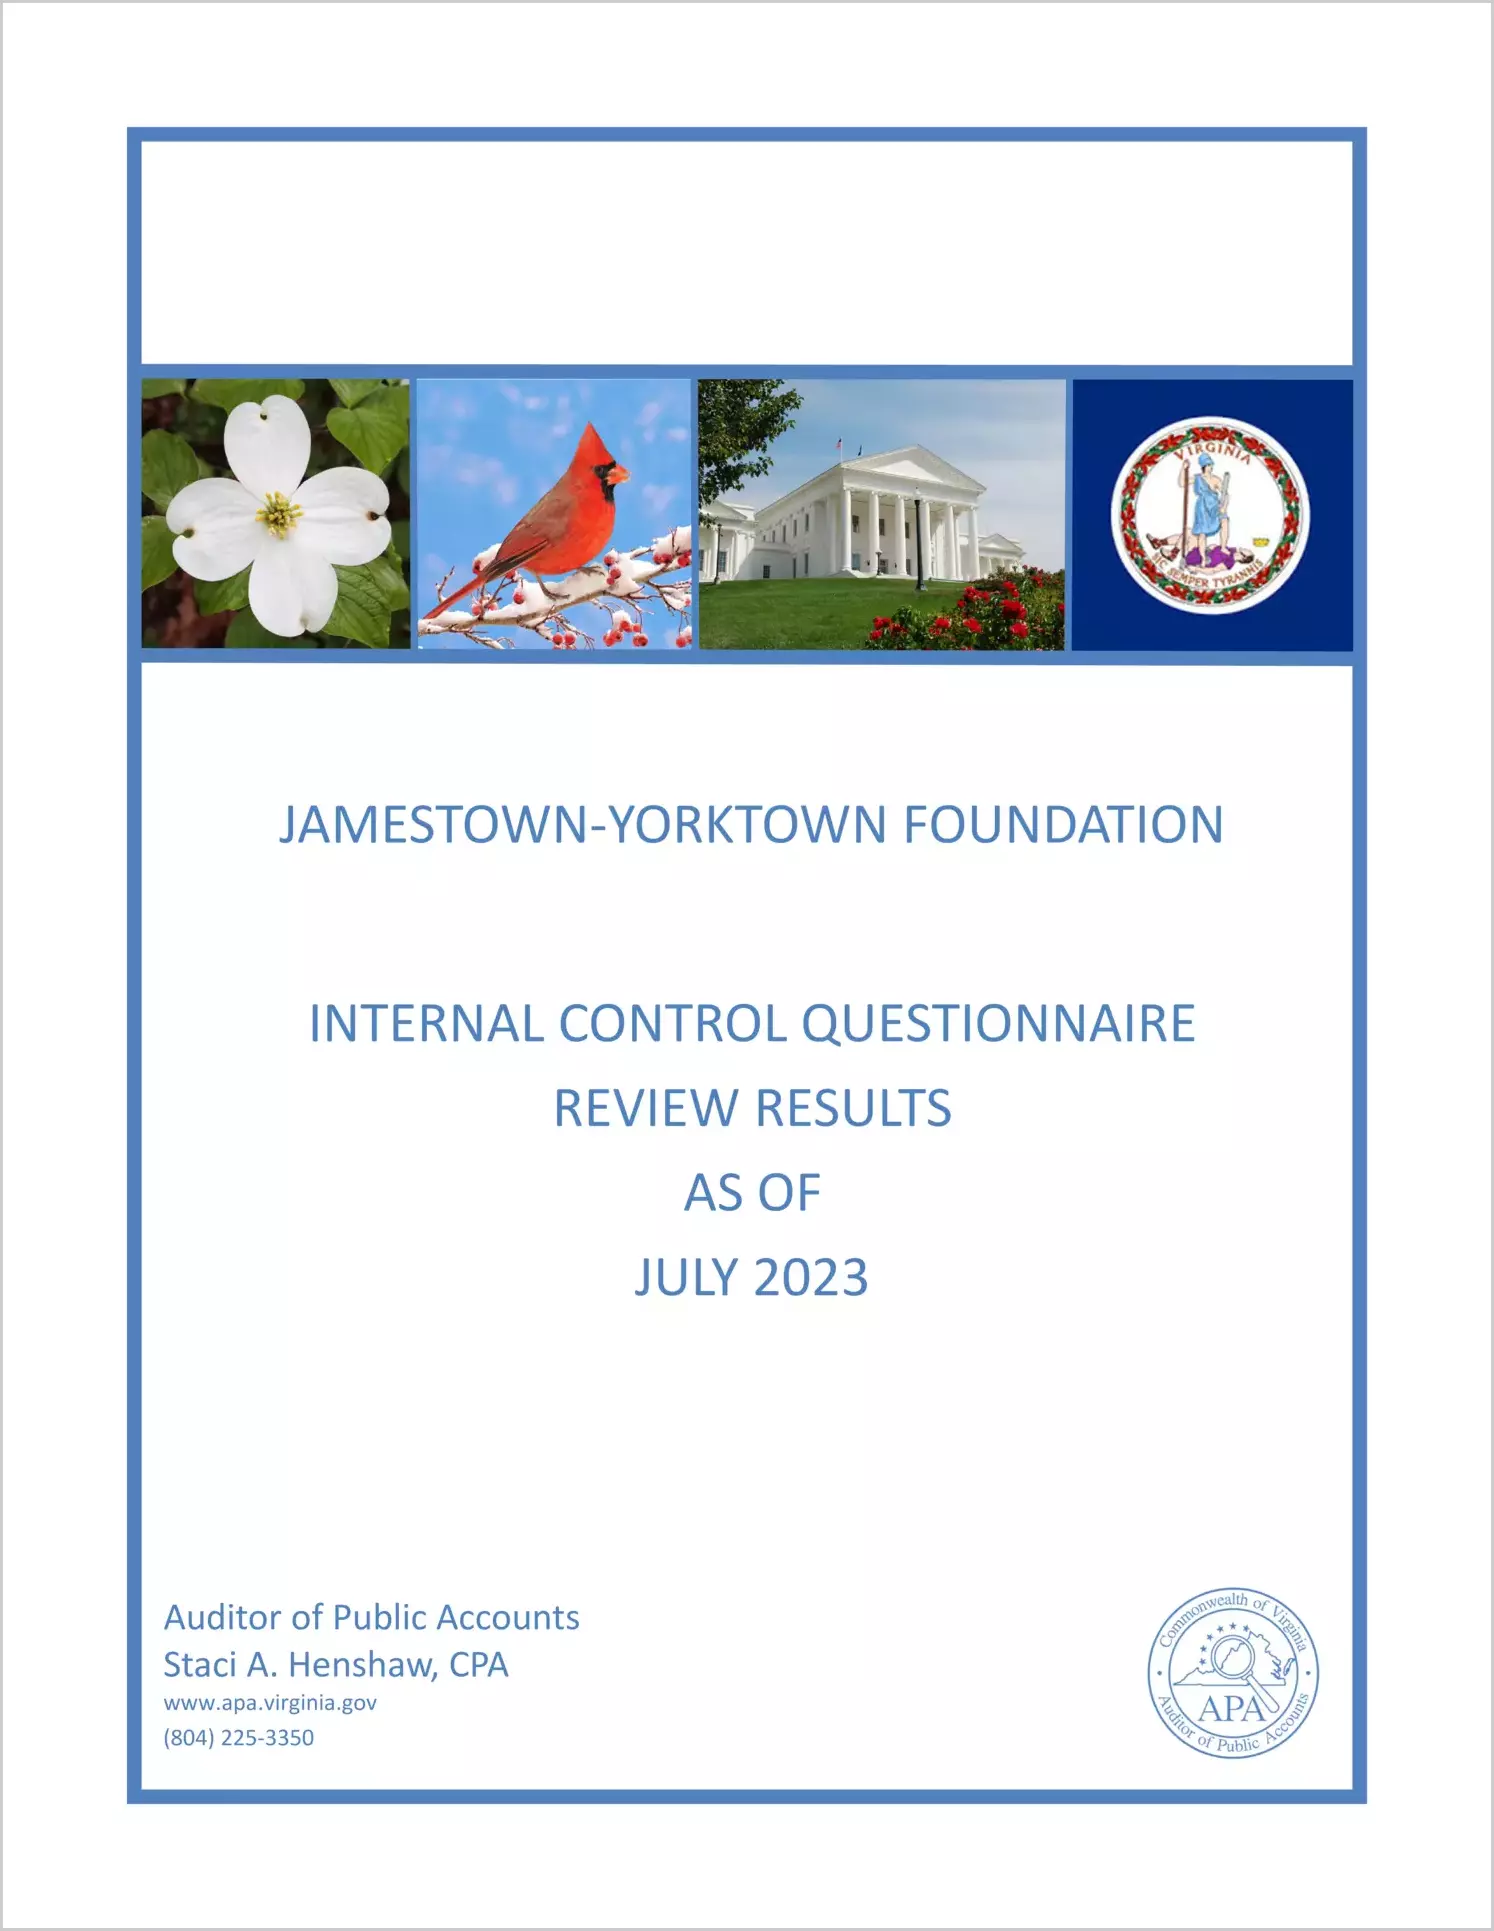 Jamestown-Yorktown Foundation Internal Control Questionnaire Review Results as of July 2023